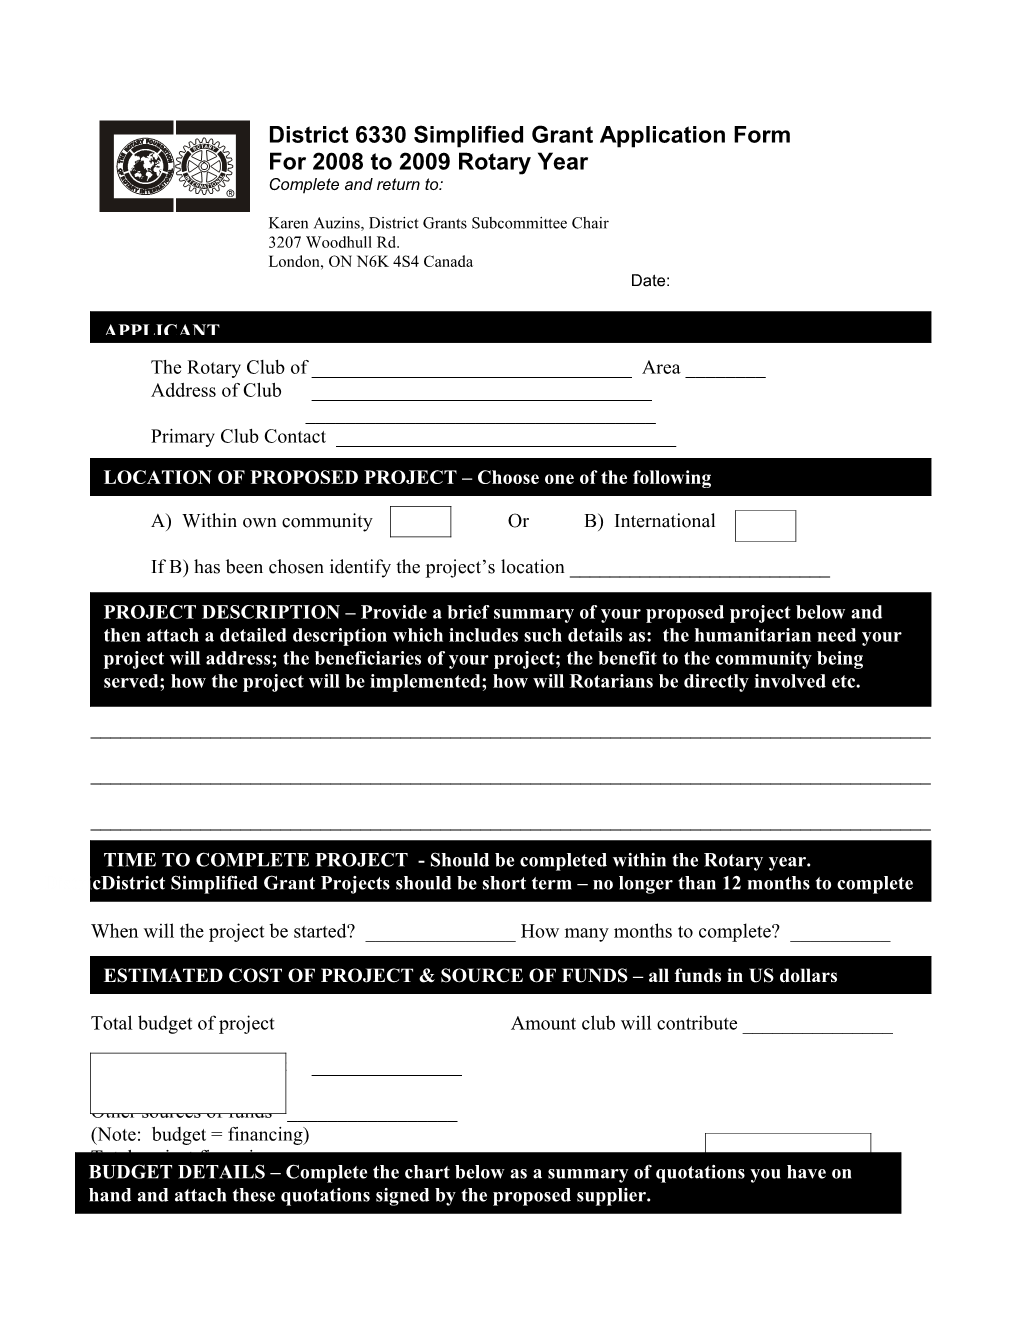 District 6330 Simplified Grant Application Form